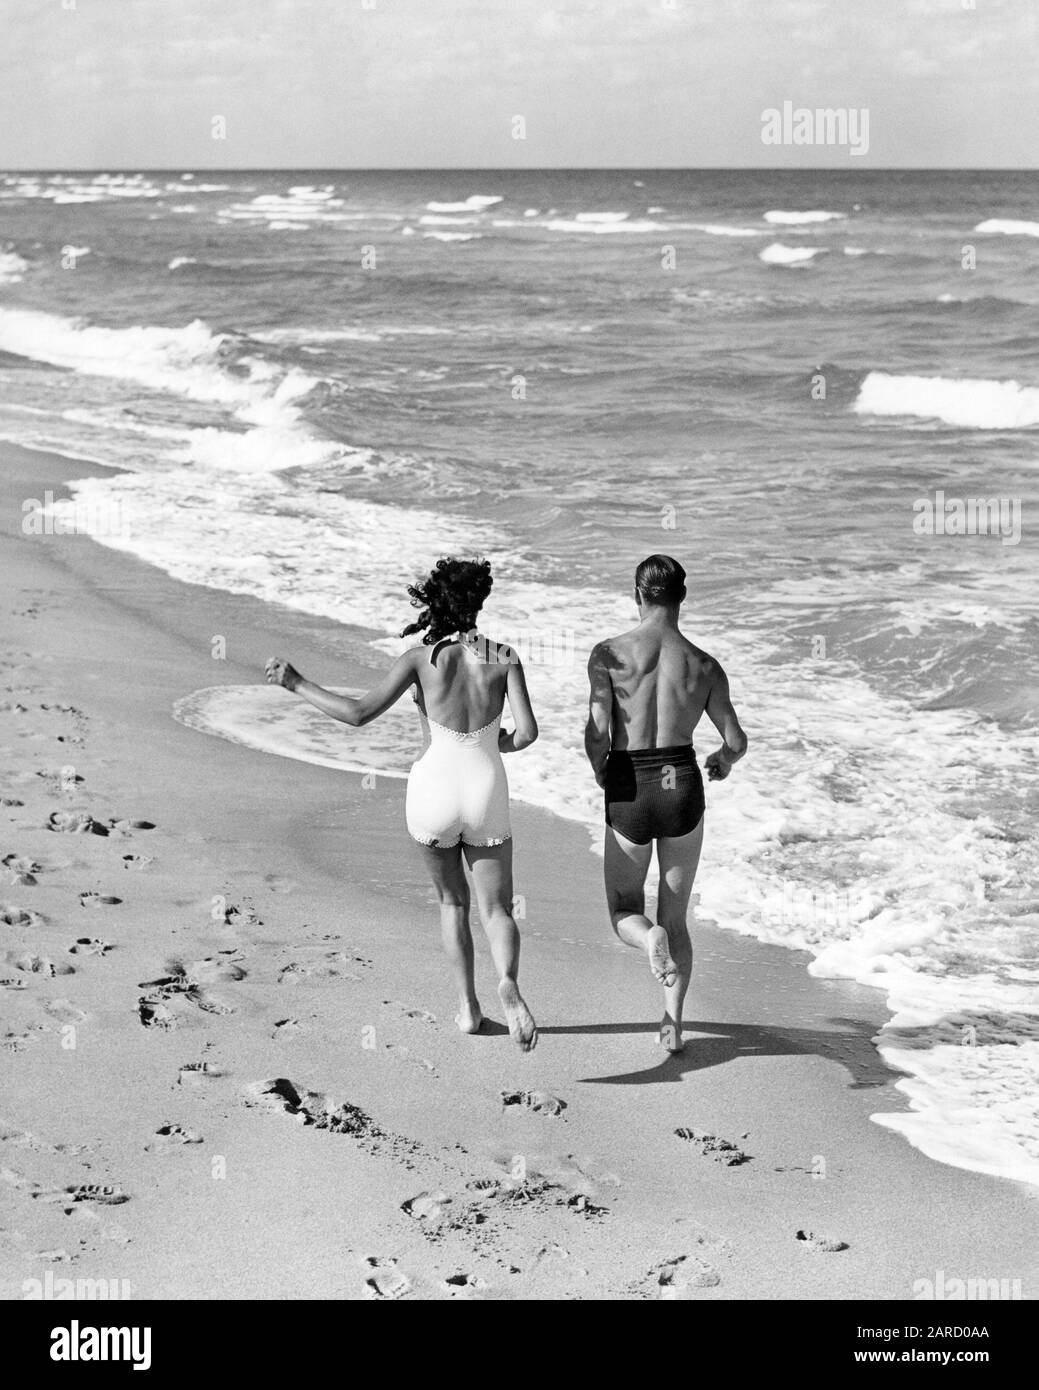 1930s 1940s COUPLE WEARING BATHING SUITS JOGGING RUNNING TOGETHER AT EDGE OF SURF ON OCEAN BEACH - b7071 HAR001 HARS MID-ADULT MAN MID-ADULT WOMAN BLACK AND WHITE CAUCASIAN ETHNICITY HAR001 OLD FASHIONED Stock Photo